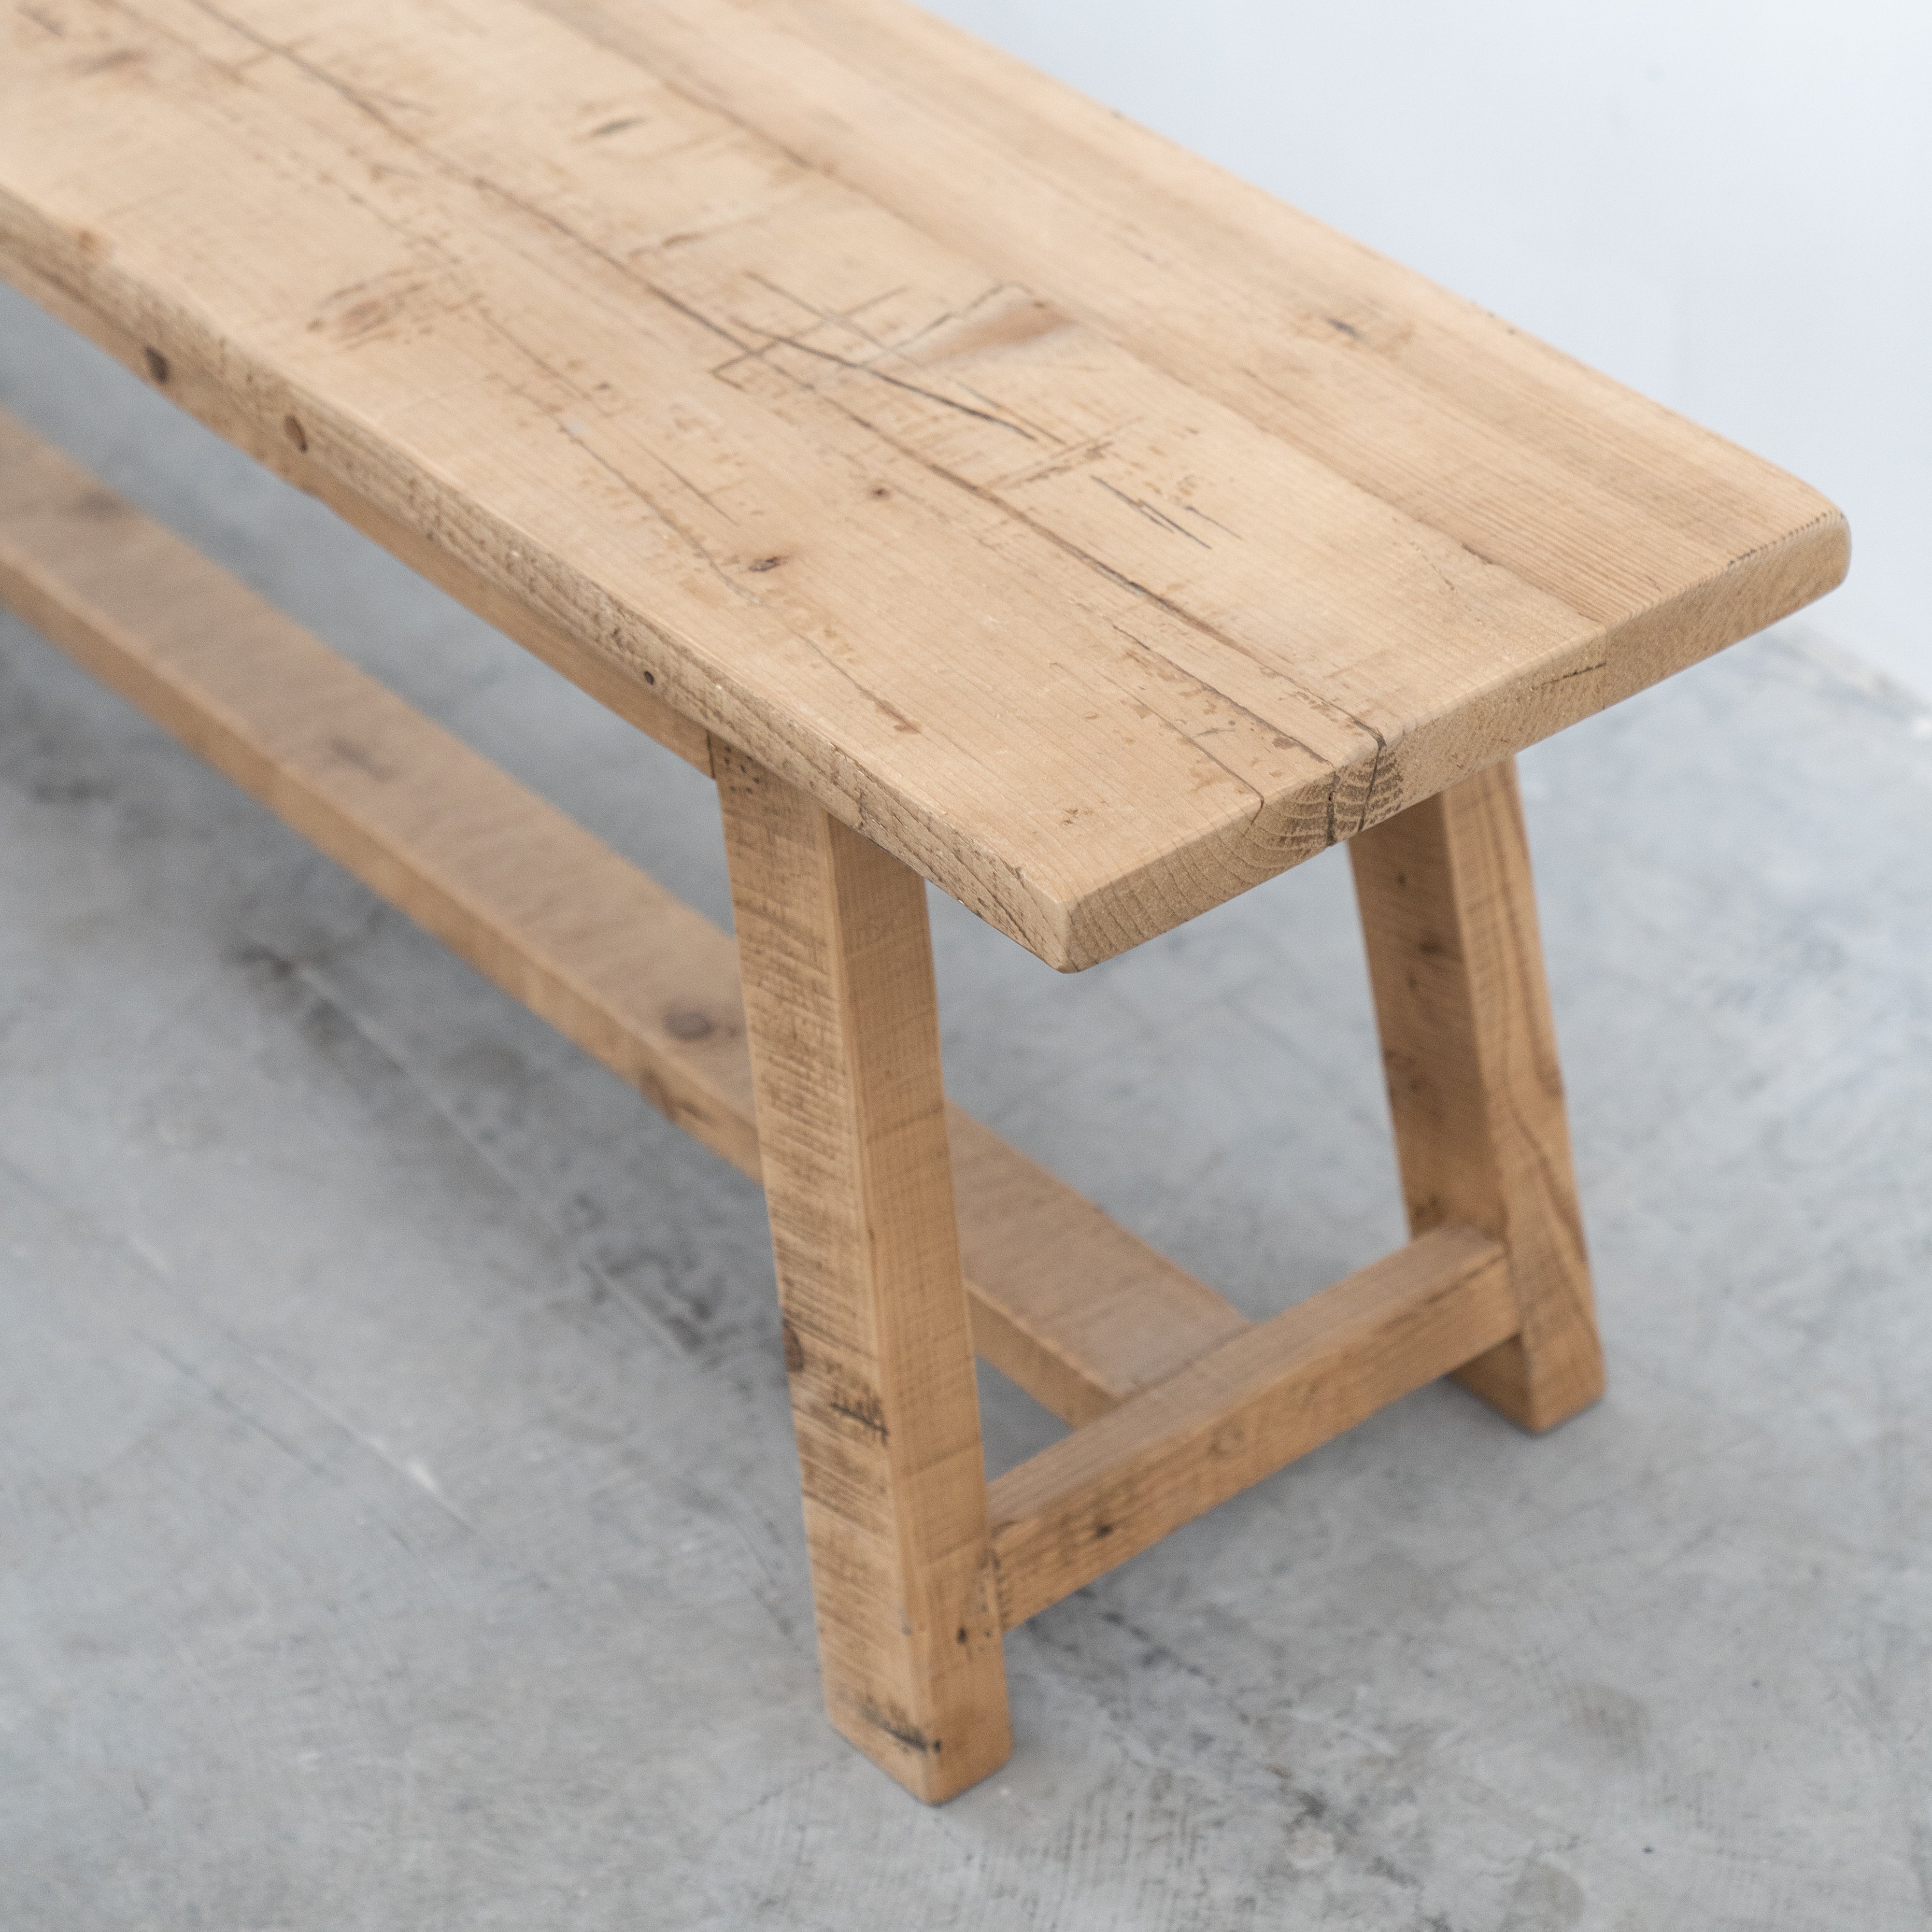 Wooden Bench  - WS Living - UAE - Bench Wood and steel Furnitures - Dubai